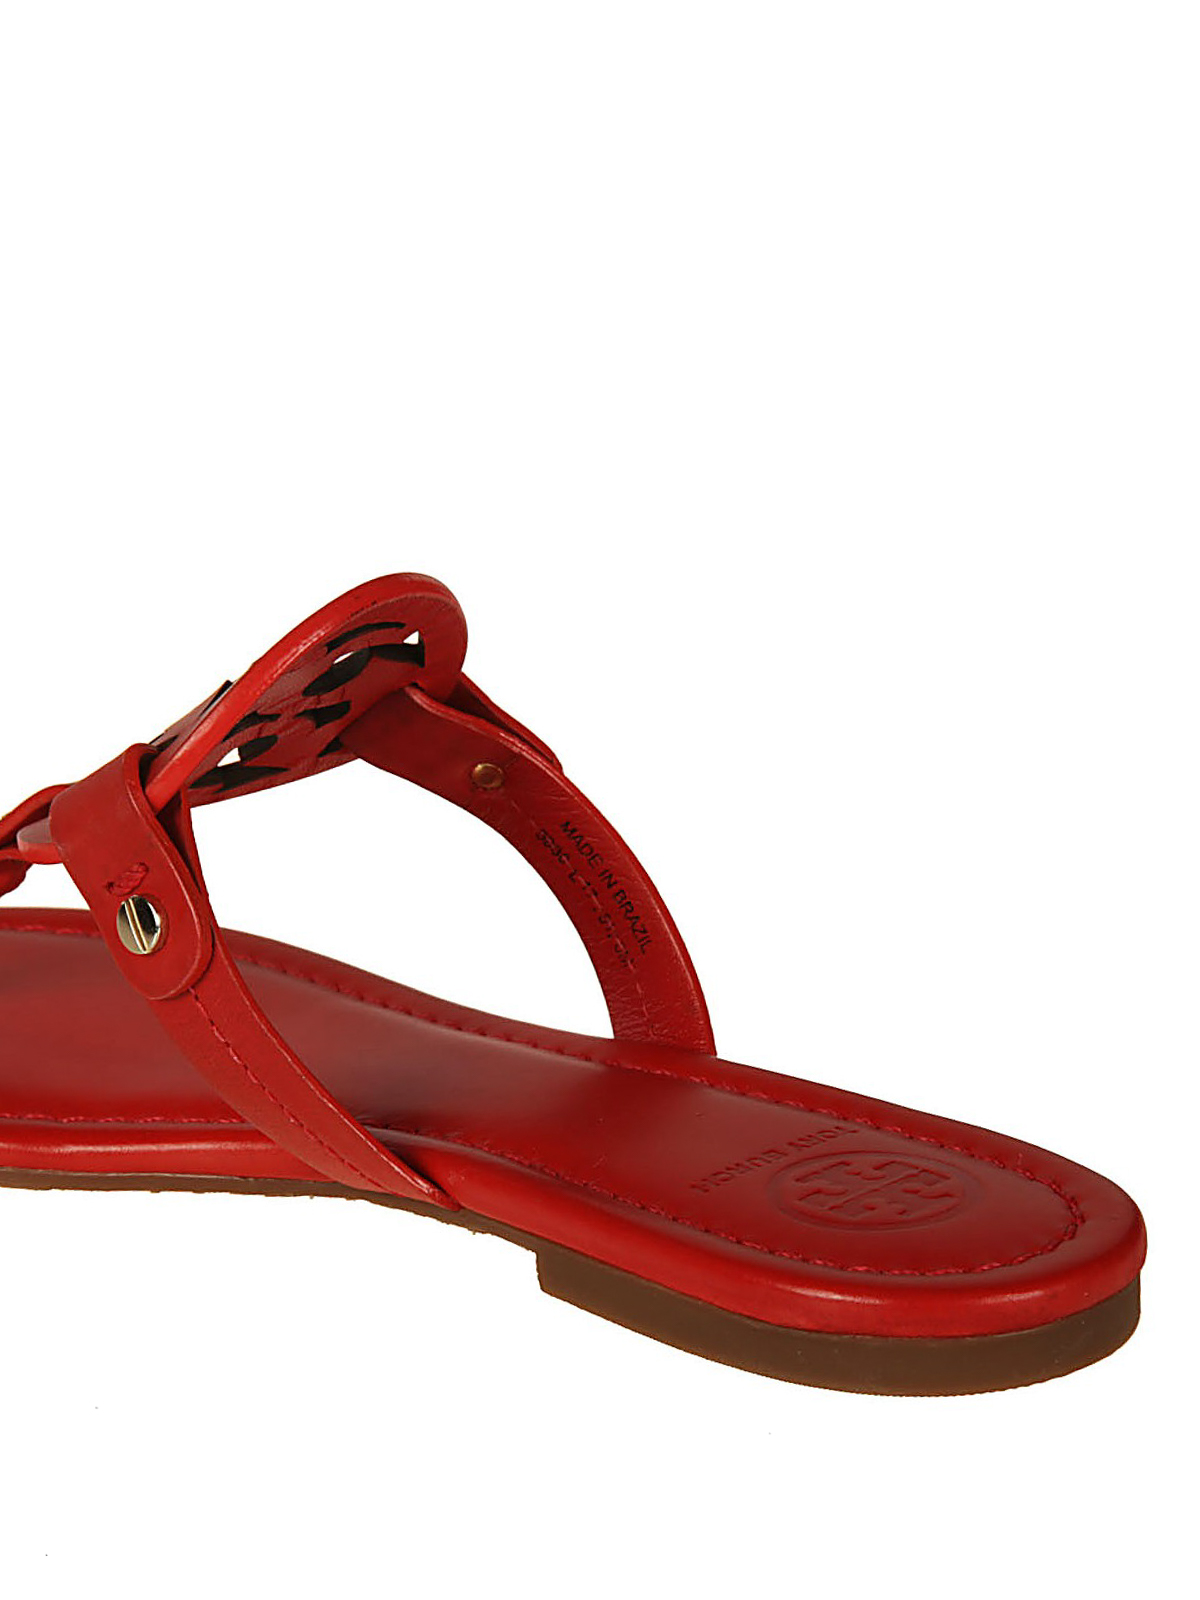 NEW Tory Burch Miller Sandals - Red 